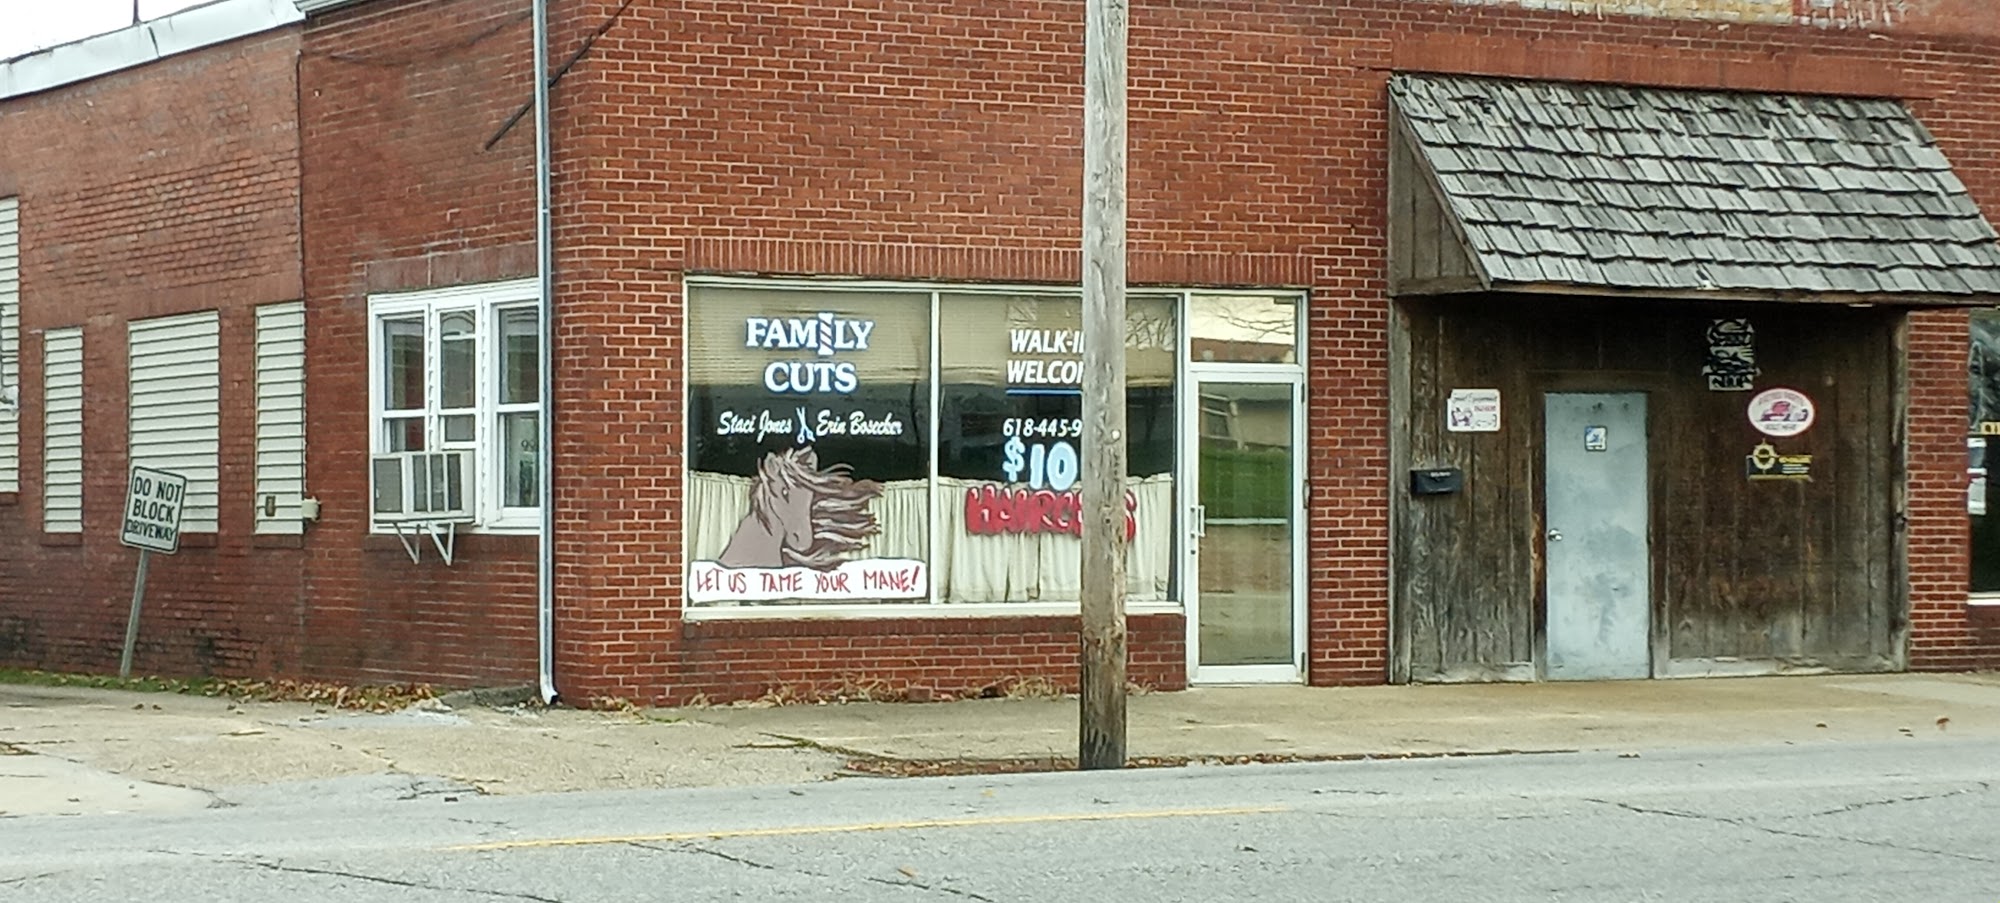 Family Cuts 28 N 4th St, Albion Illinois 62806